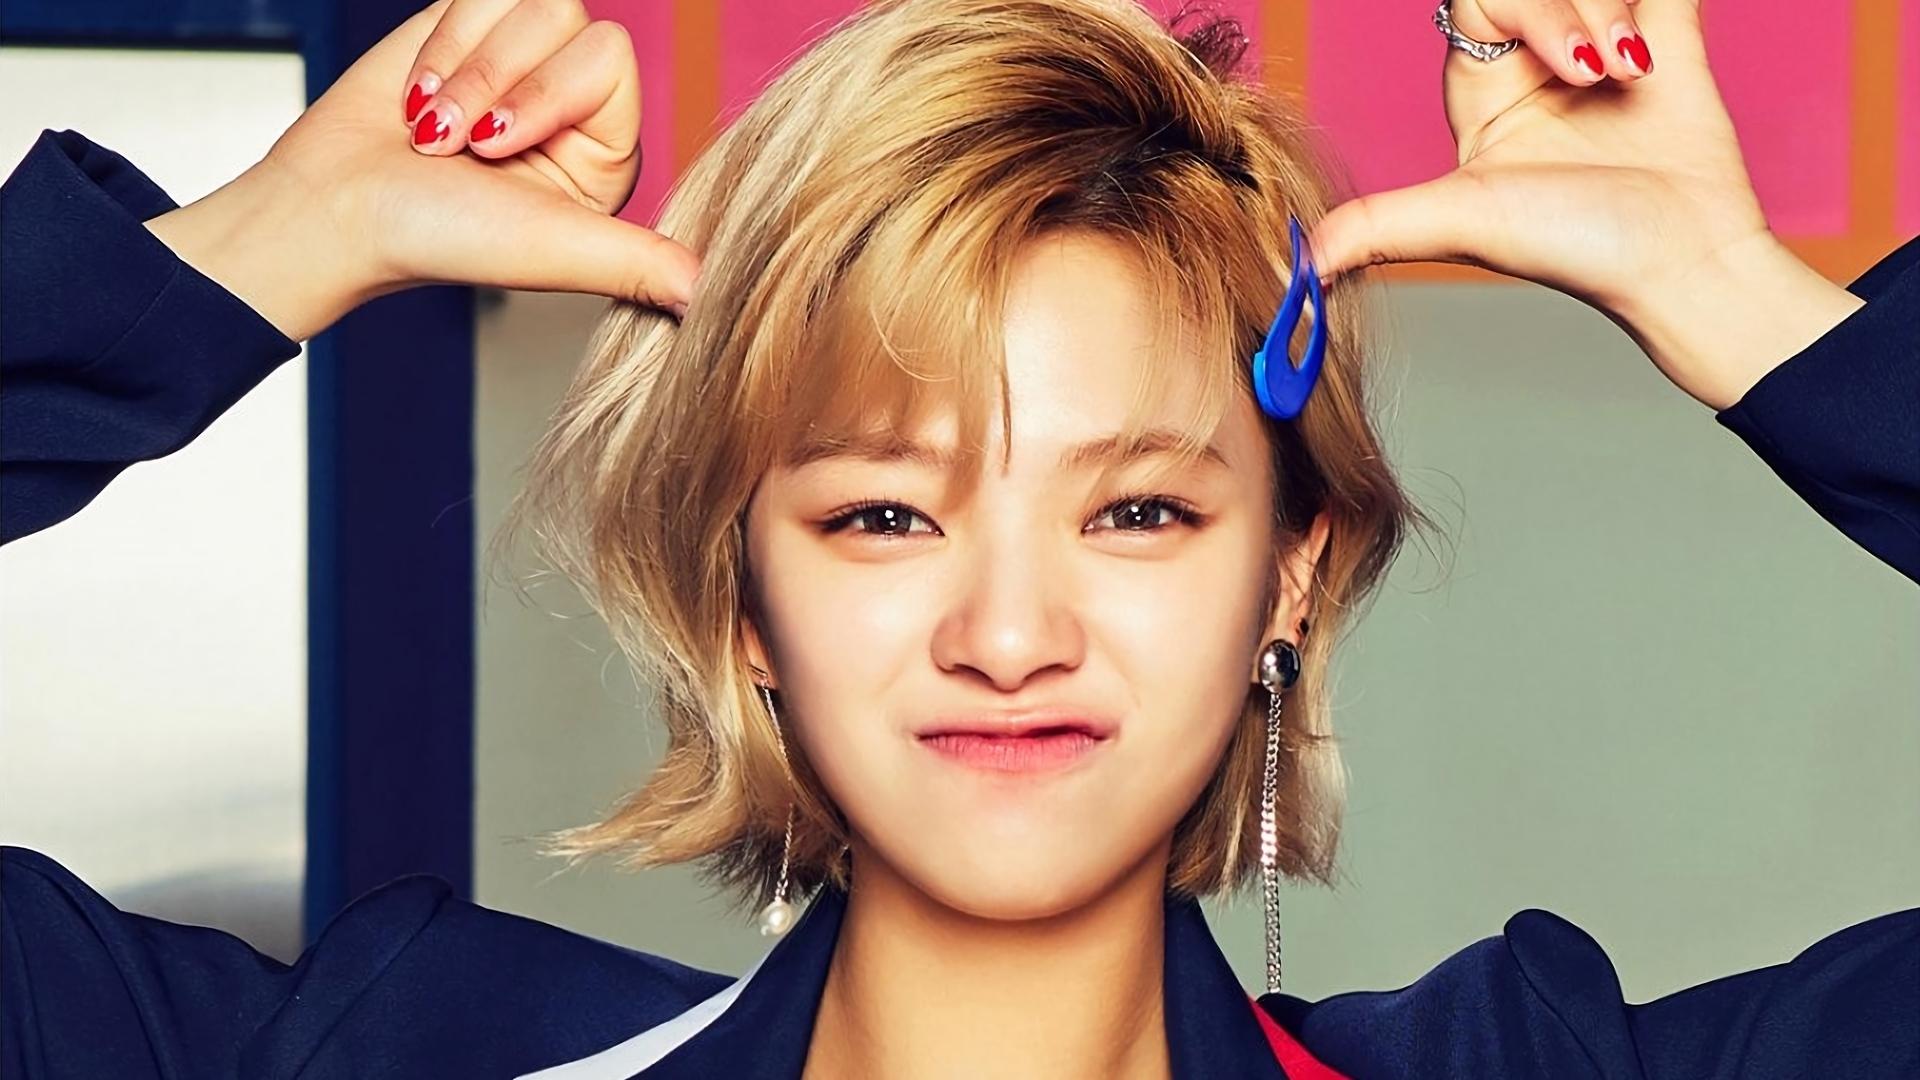 Free Download Jeongyeon TWICE Signal Beautiful K P Wallpaper 41316 [1920x1080] For Your Desktop, Mobile & Tablet. Explore Jeong Yeon Wallpaper. Jeong Yeon Wallpaper, Tae Yeon Wallpaper, Yeon Woo Wallpaper